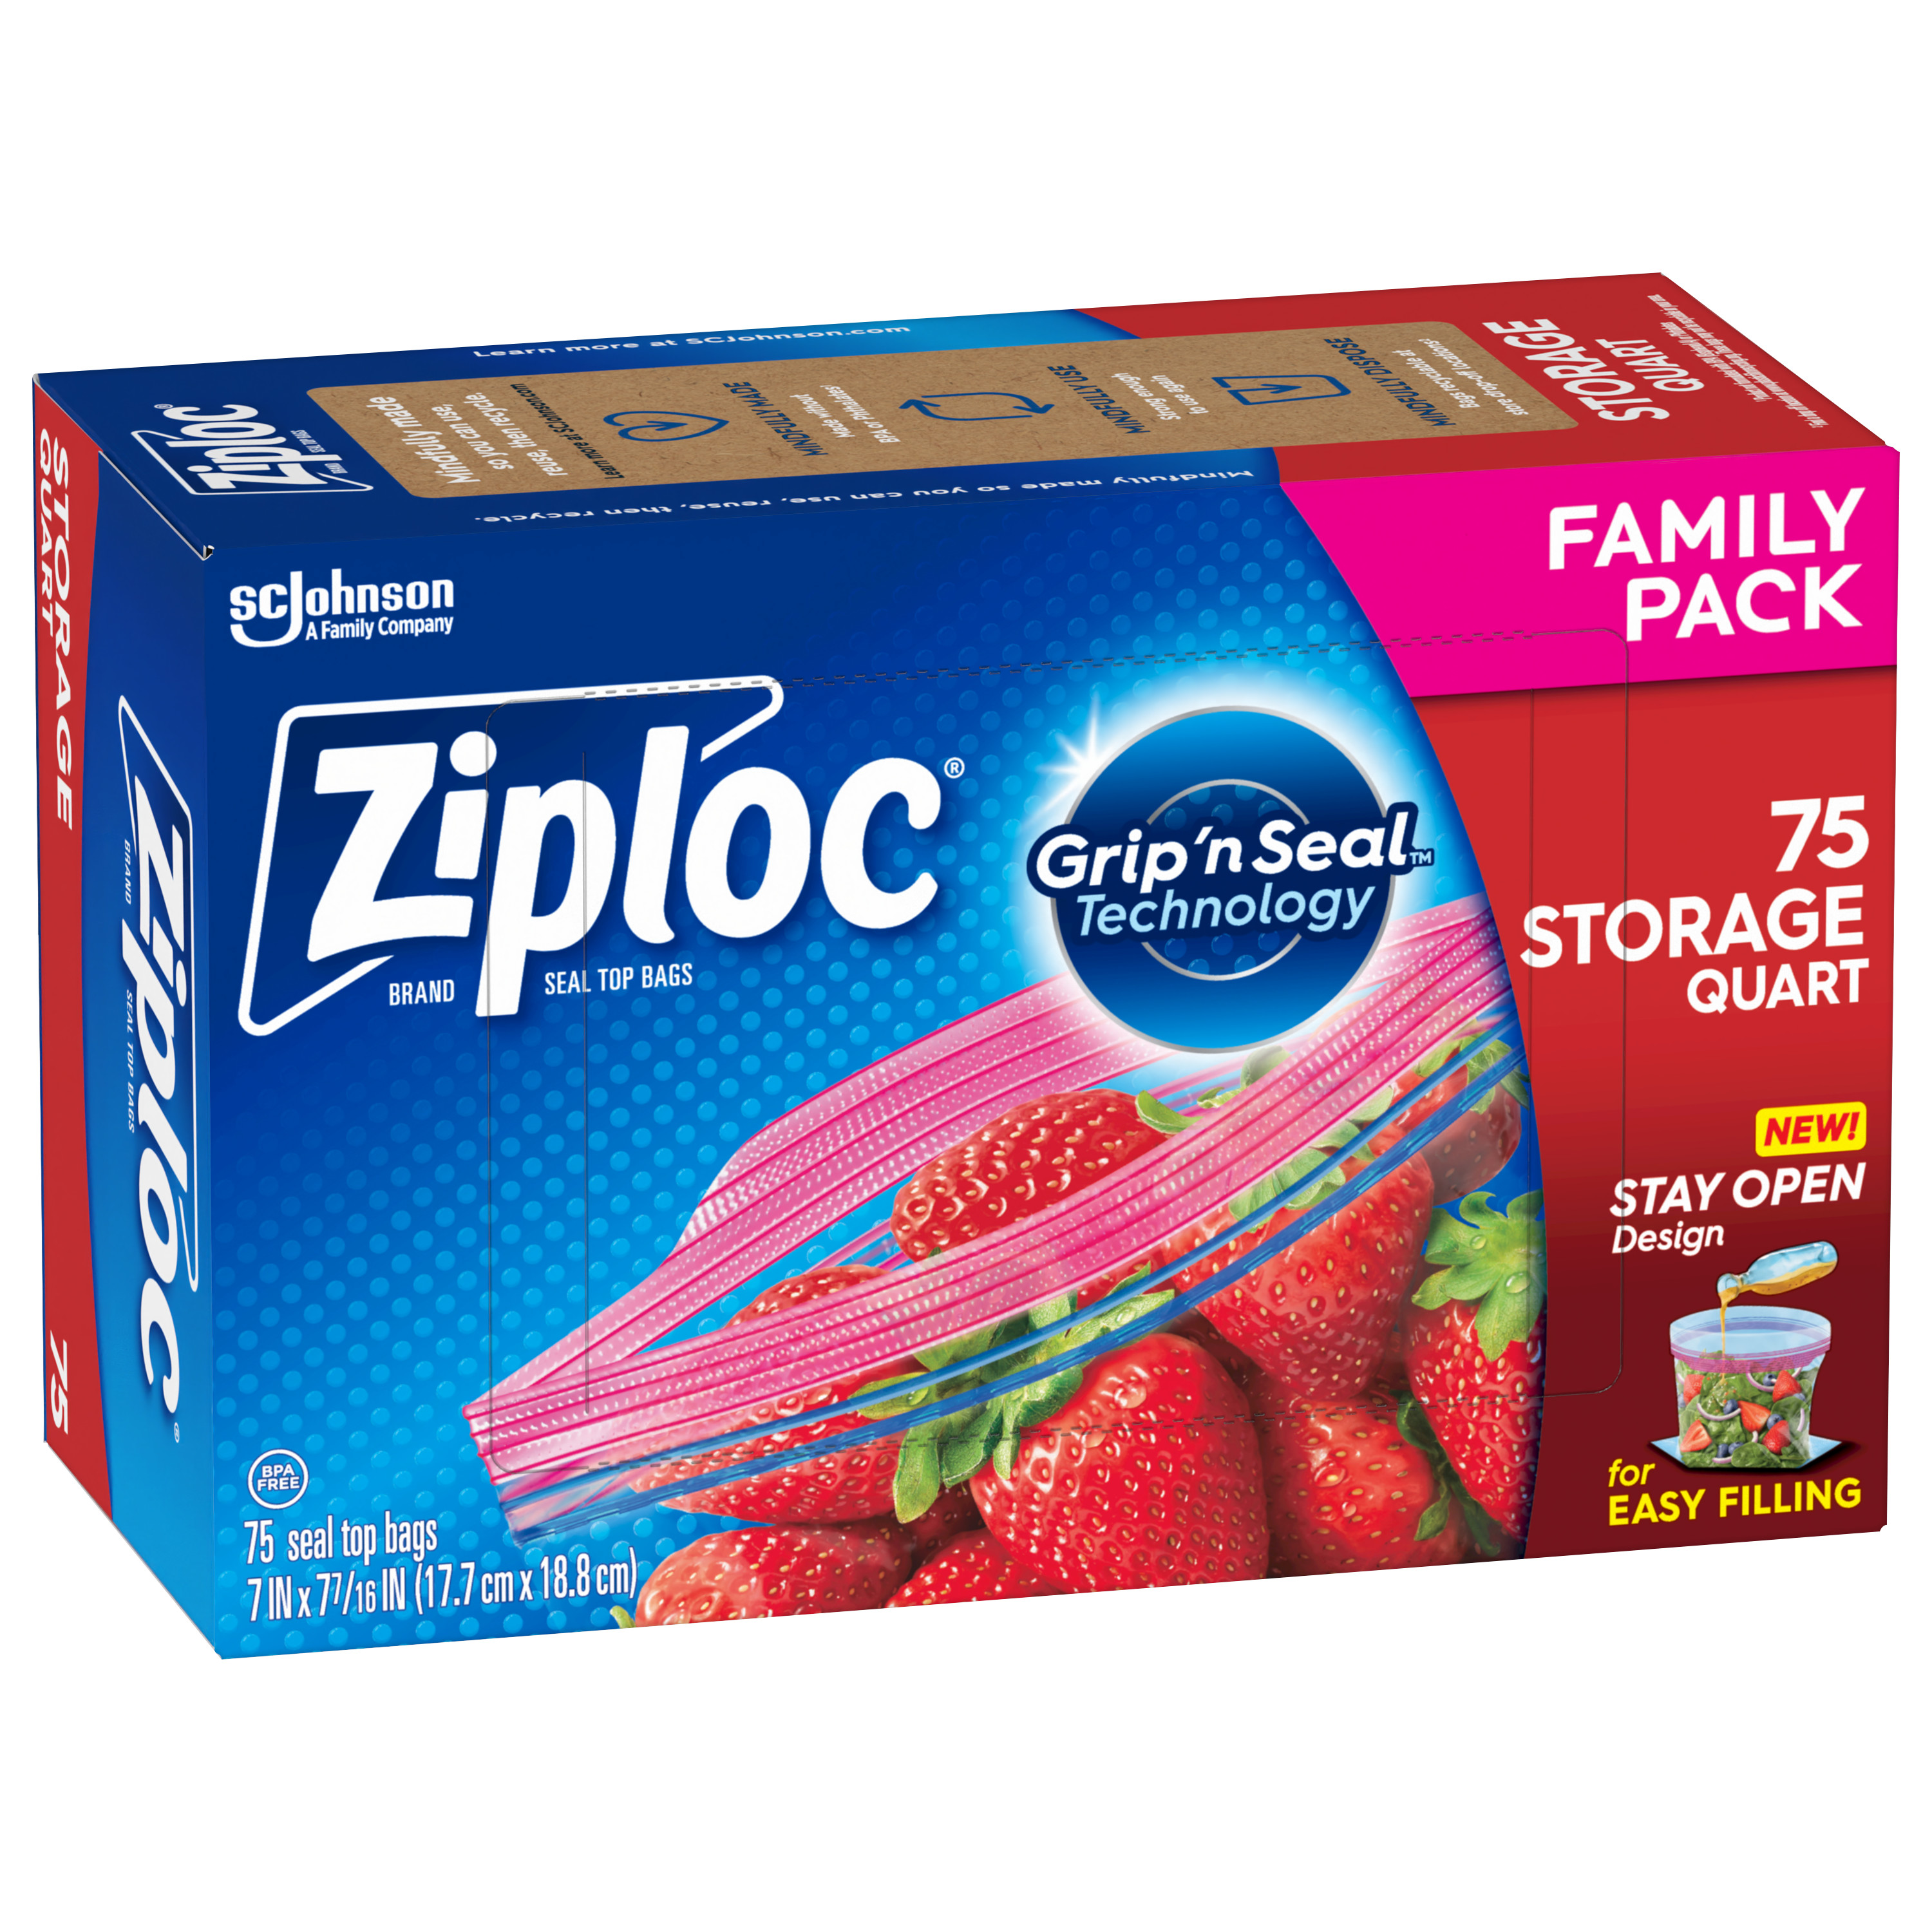 Ziploc® Brand Storage Bags with New Stay Open Design, Quart, 75 Count ...